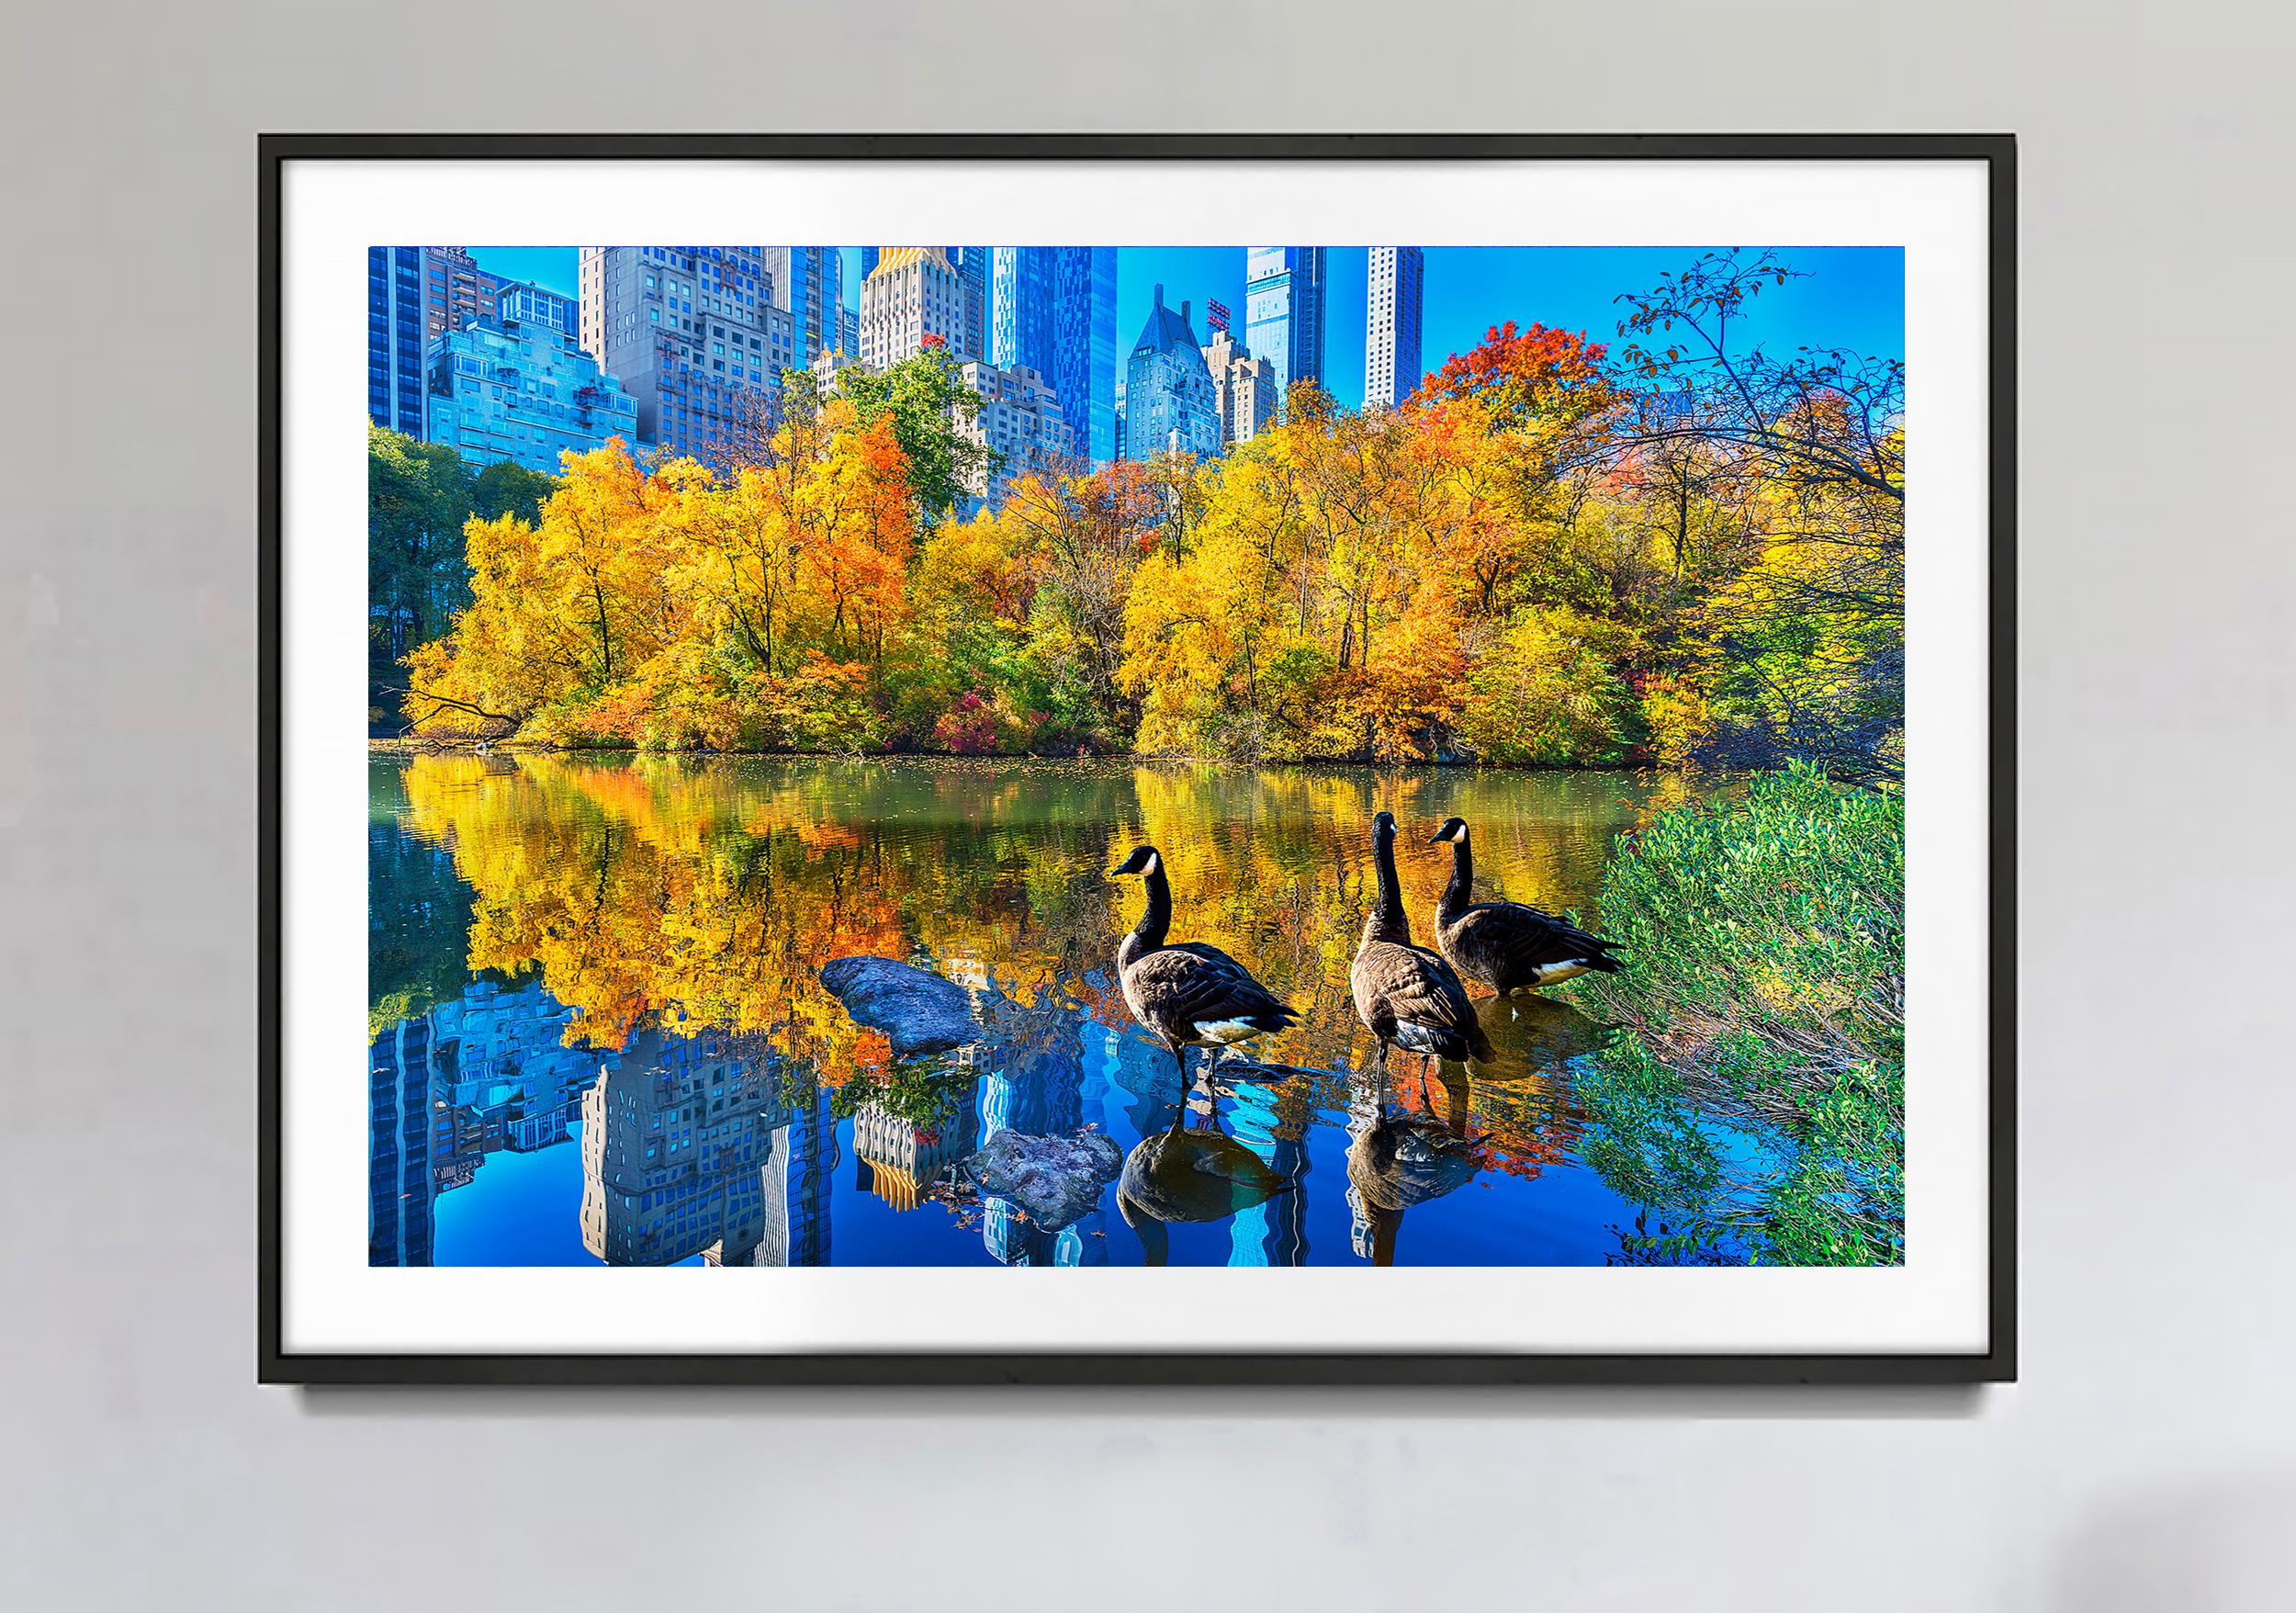 Ducks In Central Park Pond In Autumn - Photograph by Mitchell Funk